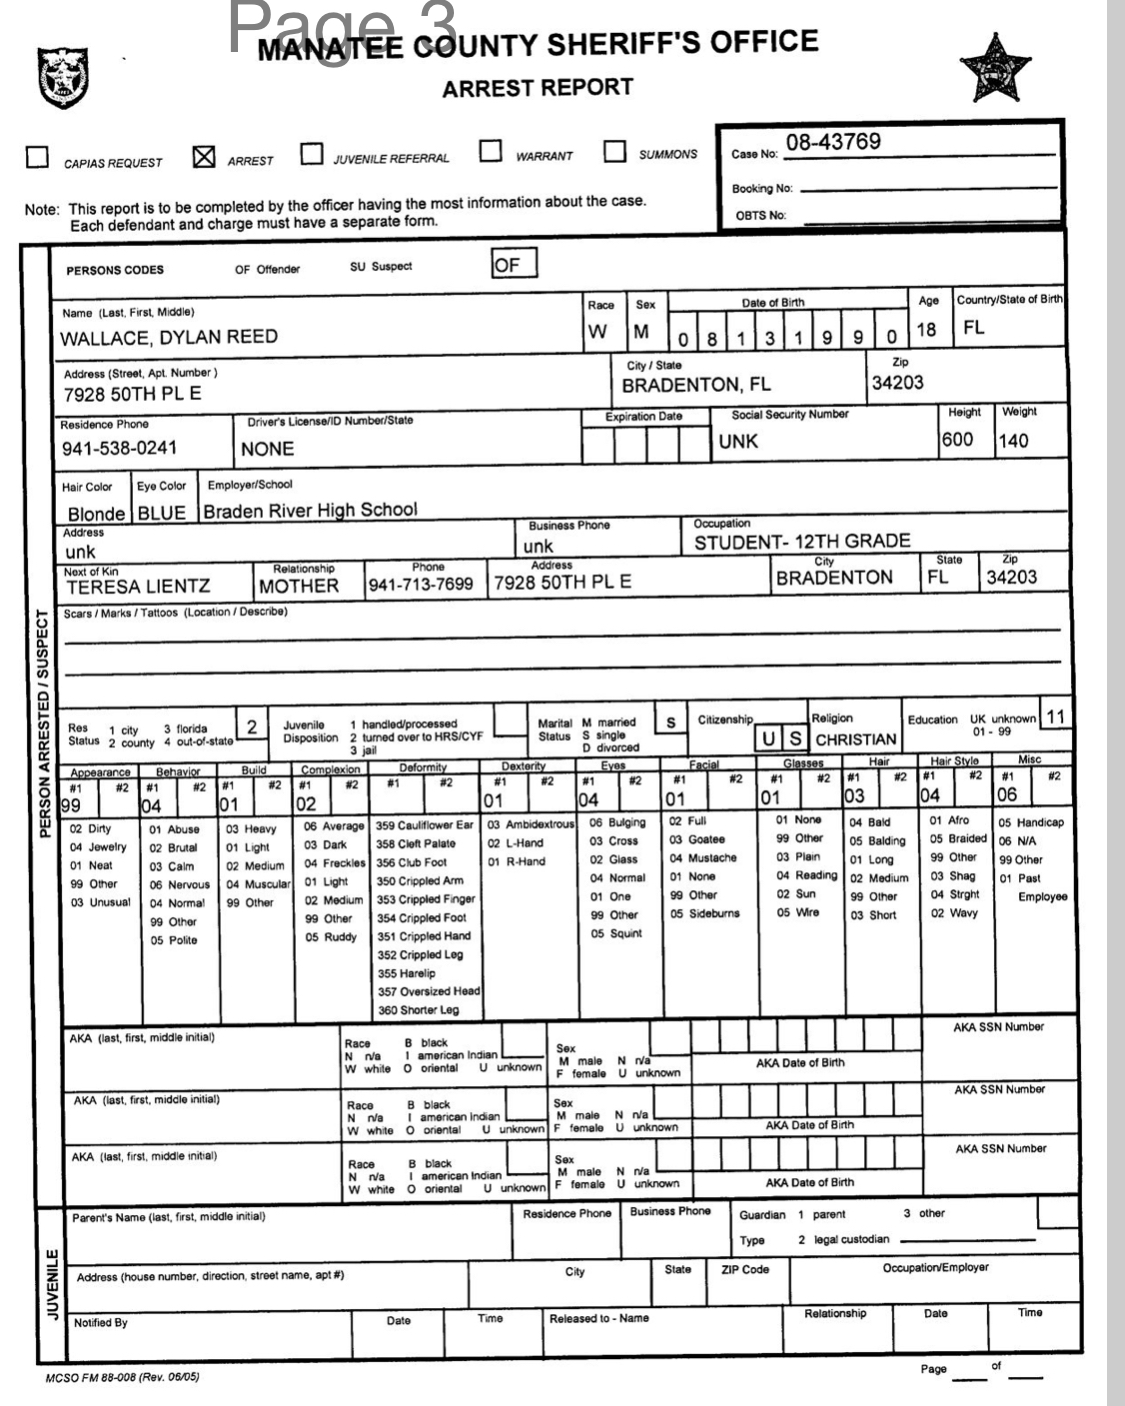 Dylan Reed Wallace Felony Arrest Page 3